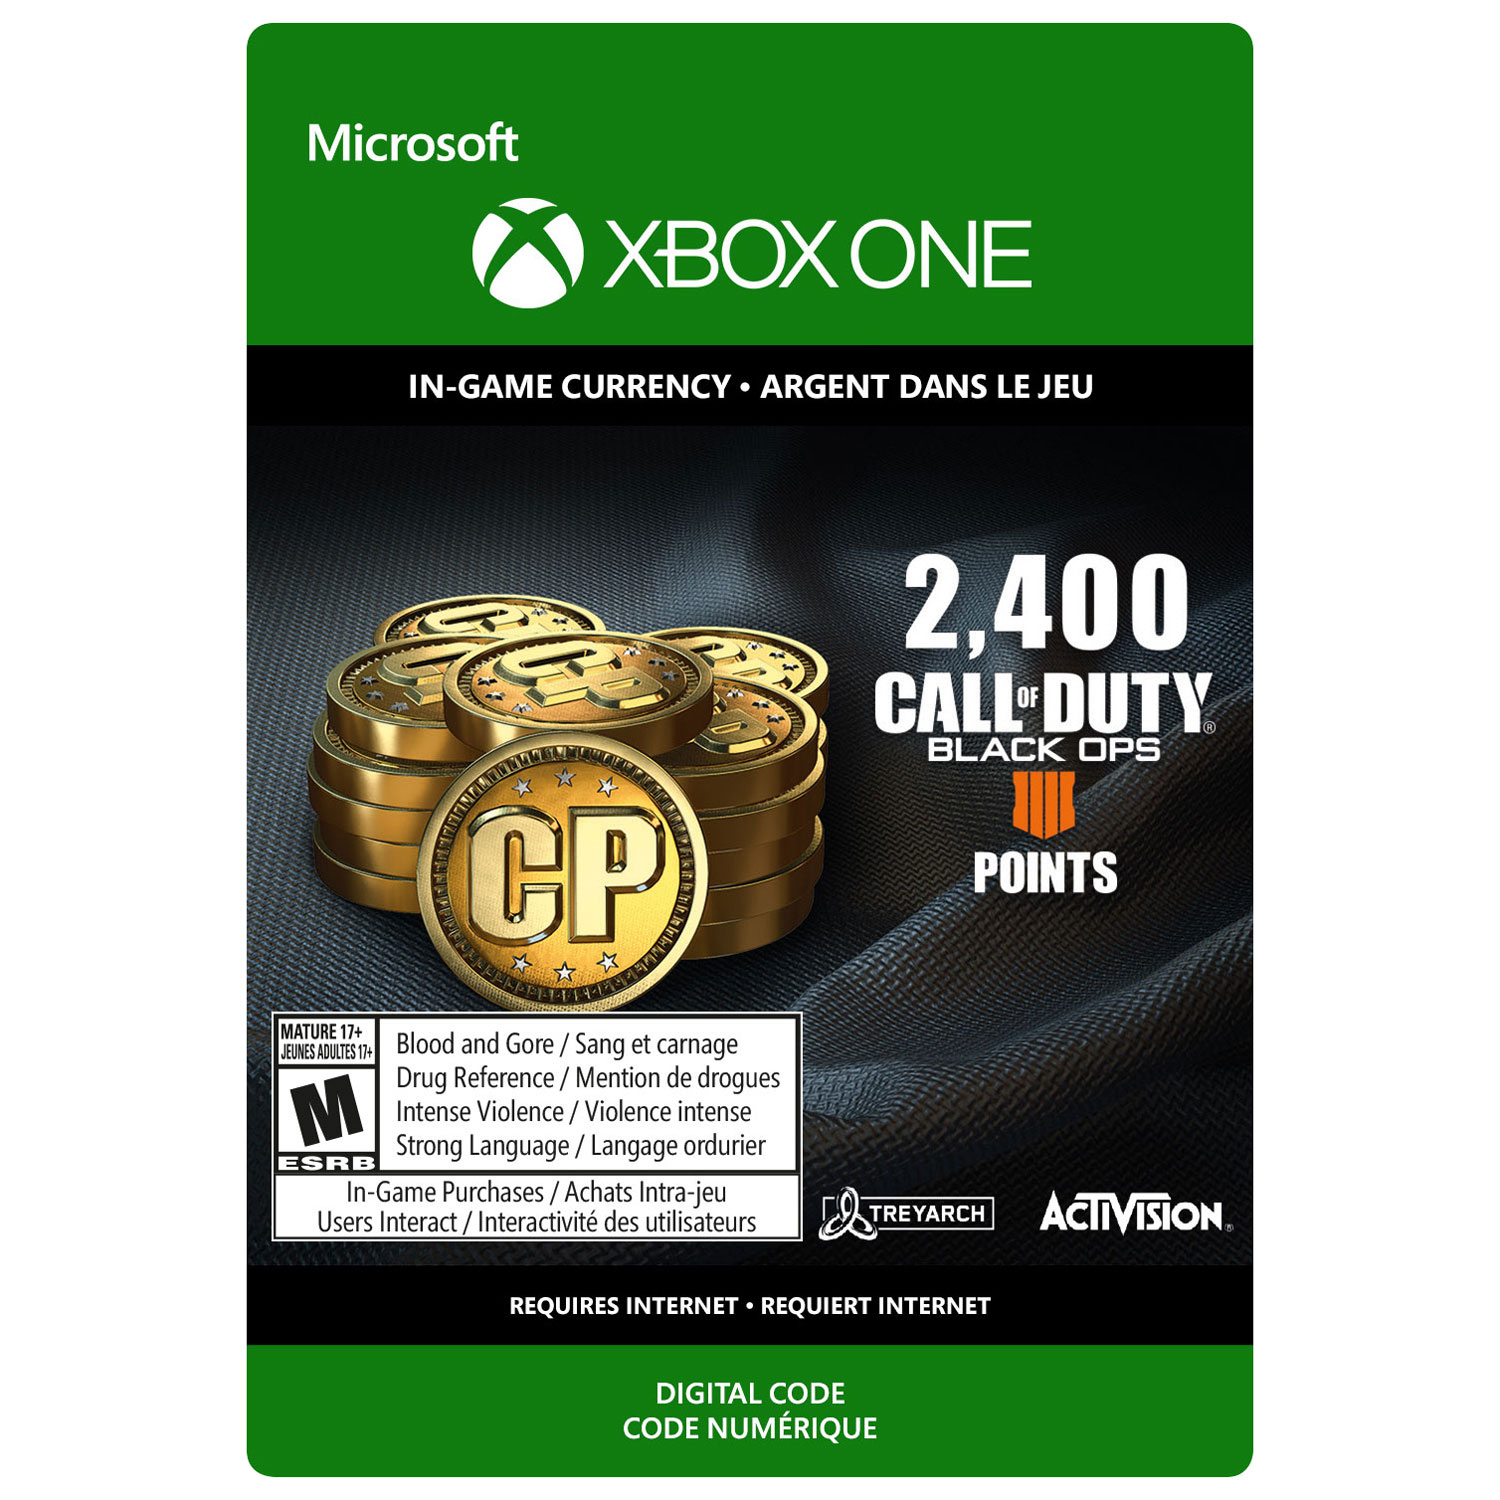 Call of Duty Black Ops 4: 2,400 COD Points (Xbox One) - Digital Download